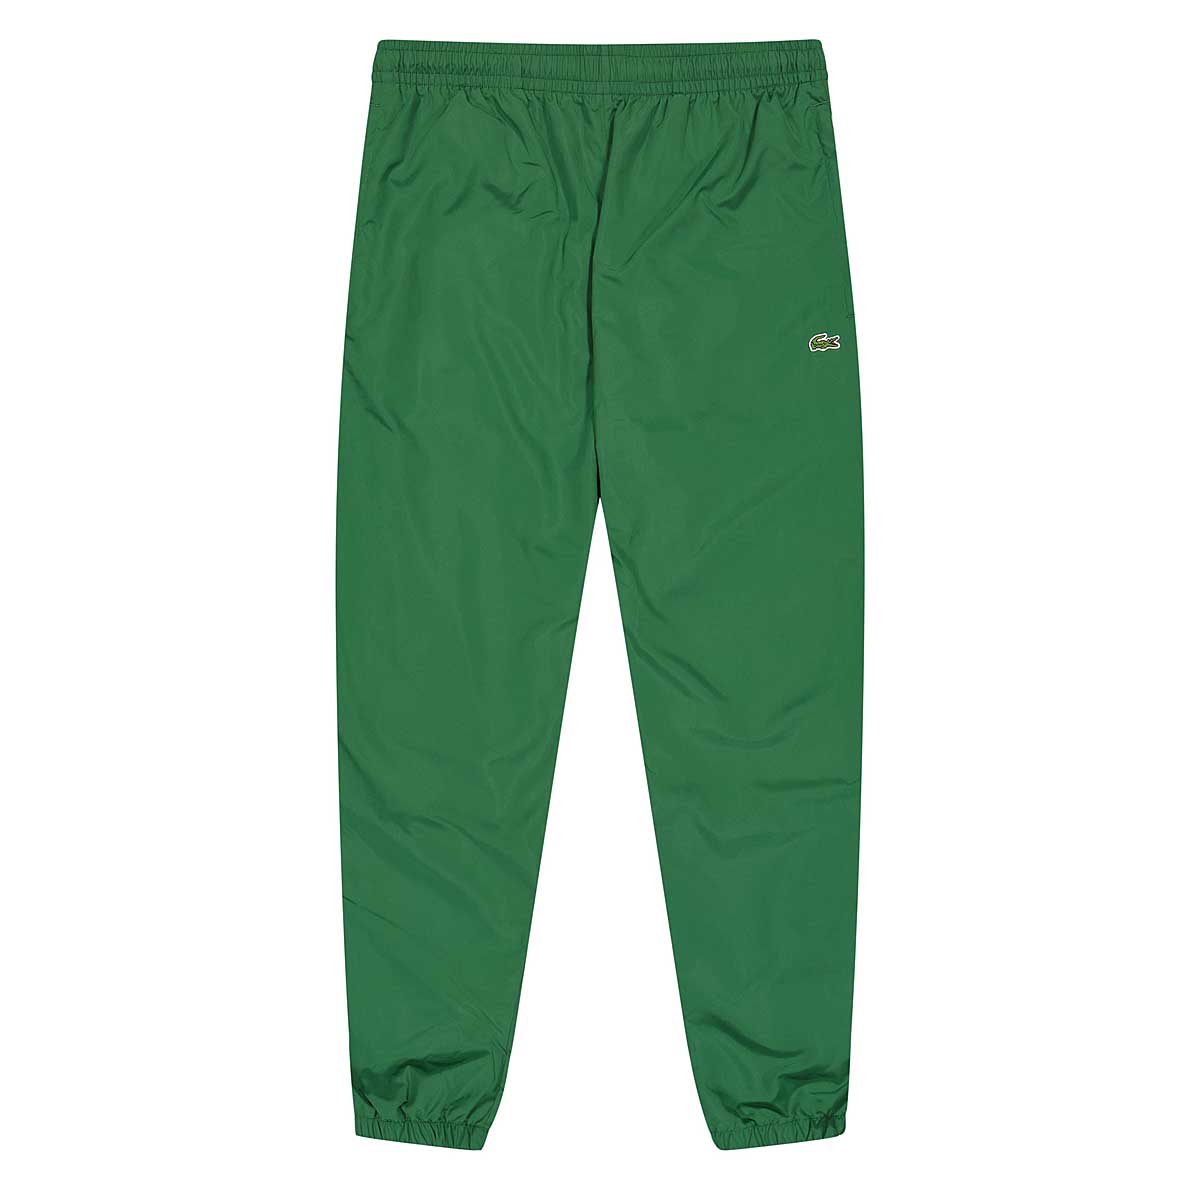 Lacoste Trackpants, Green